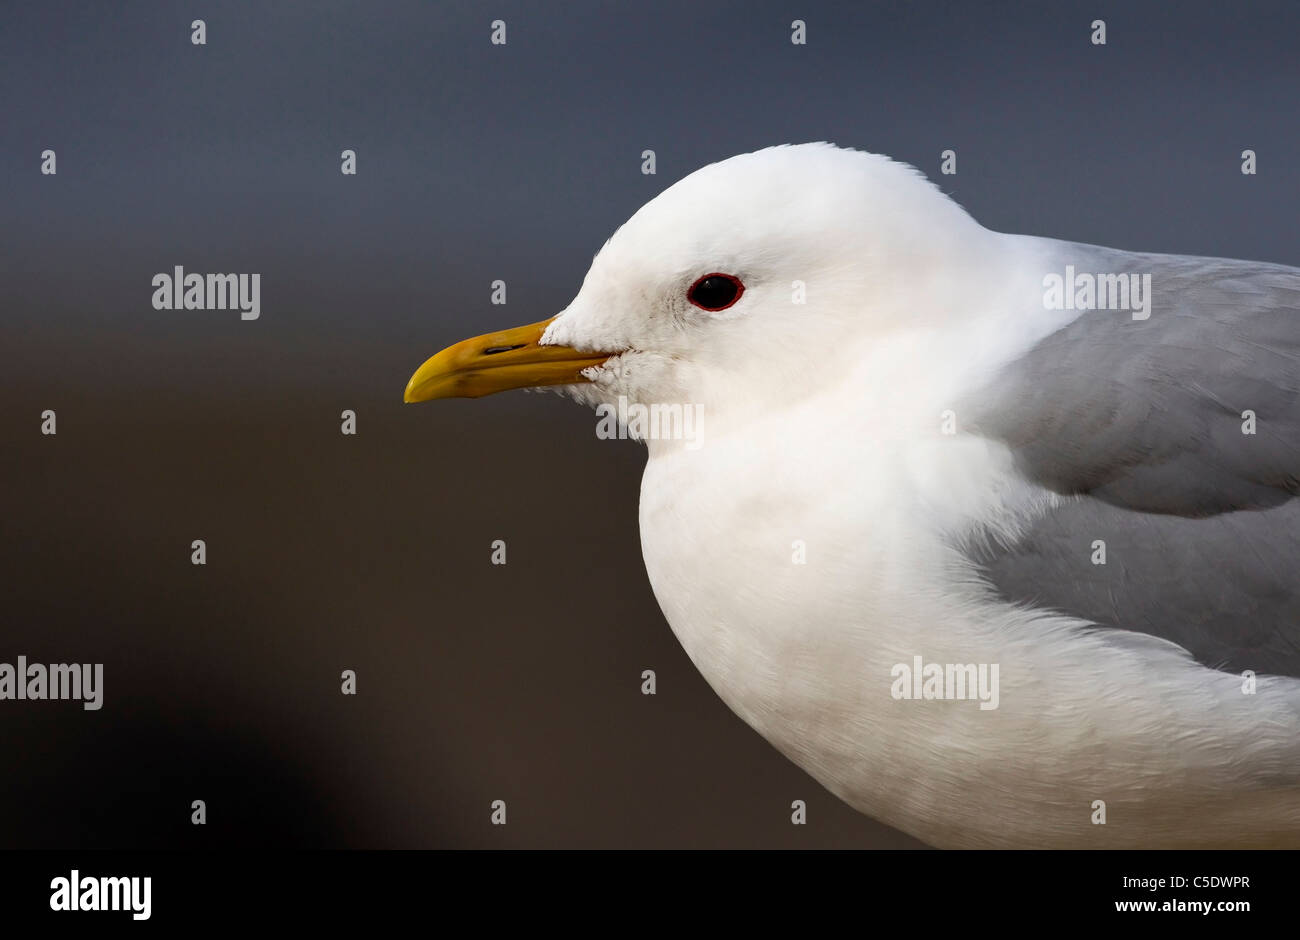 Close-up side view of a gull against blurred background Stock Photo